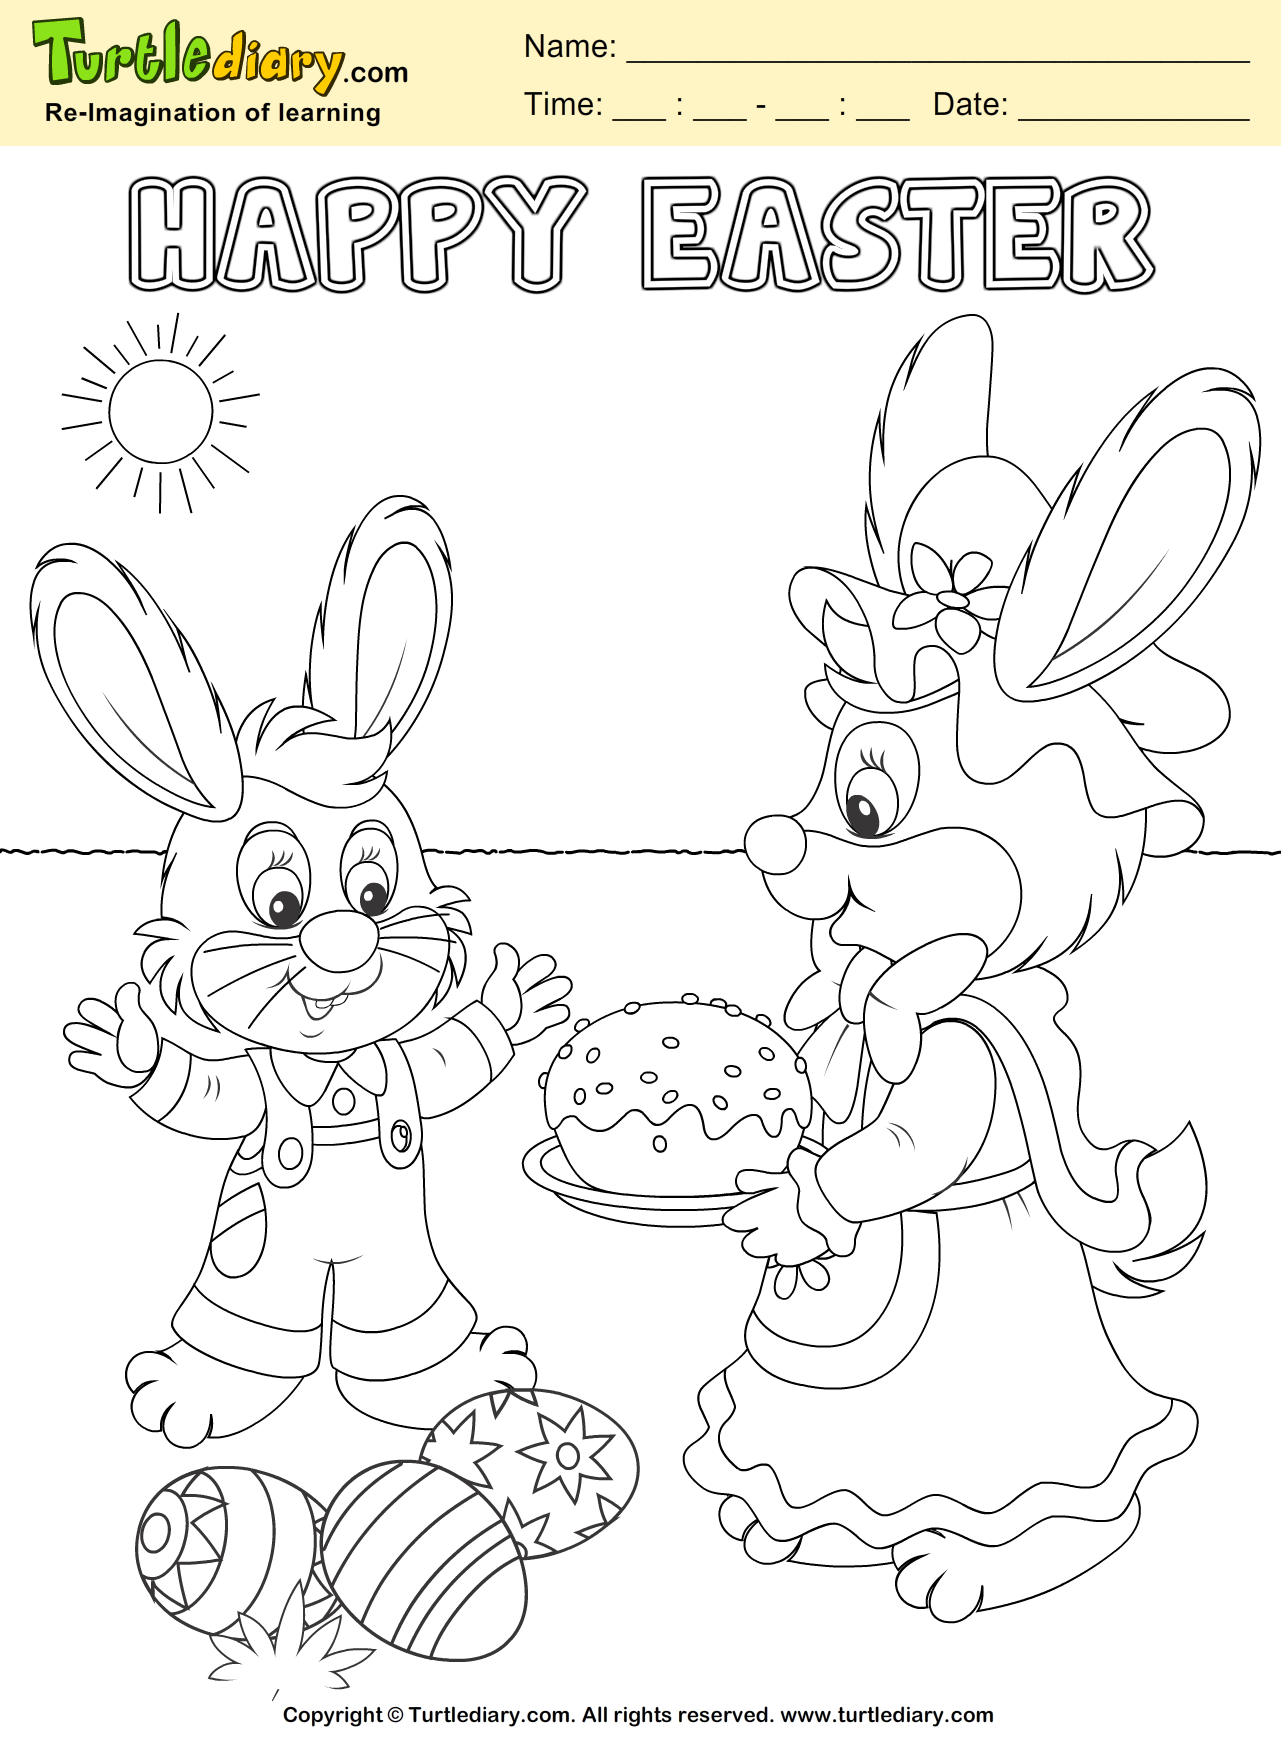 Bunny and Easter Egg Coloring Page